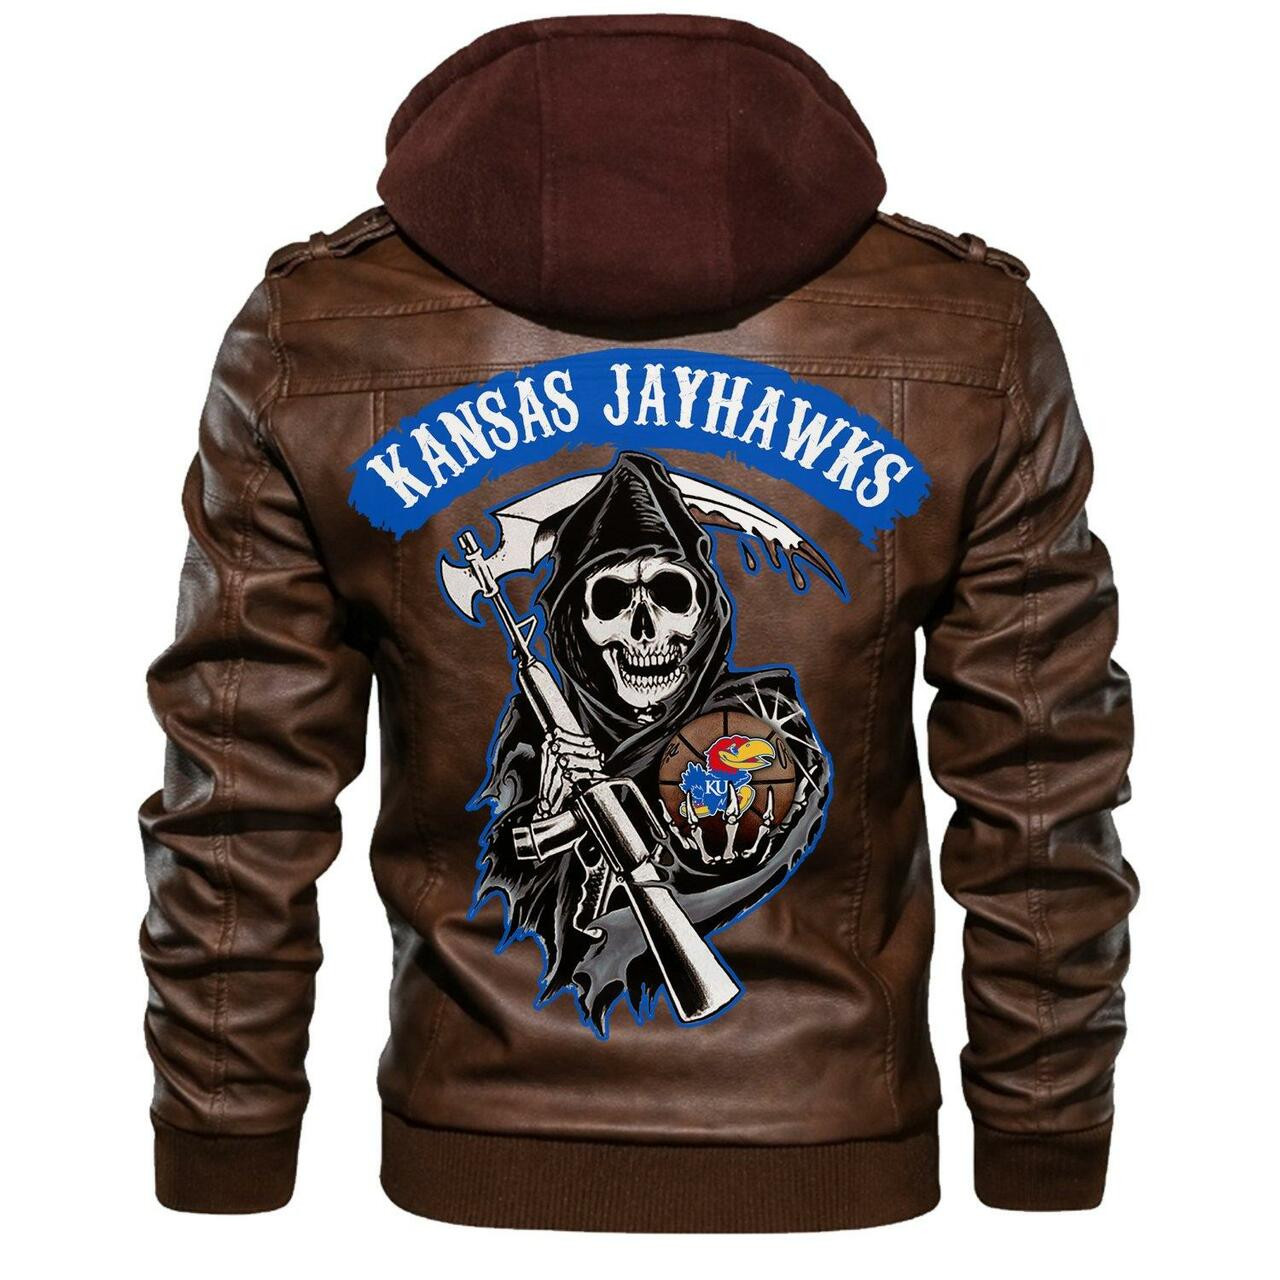 Check out our collection of the latest and greatest leather jacket 58